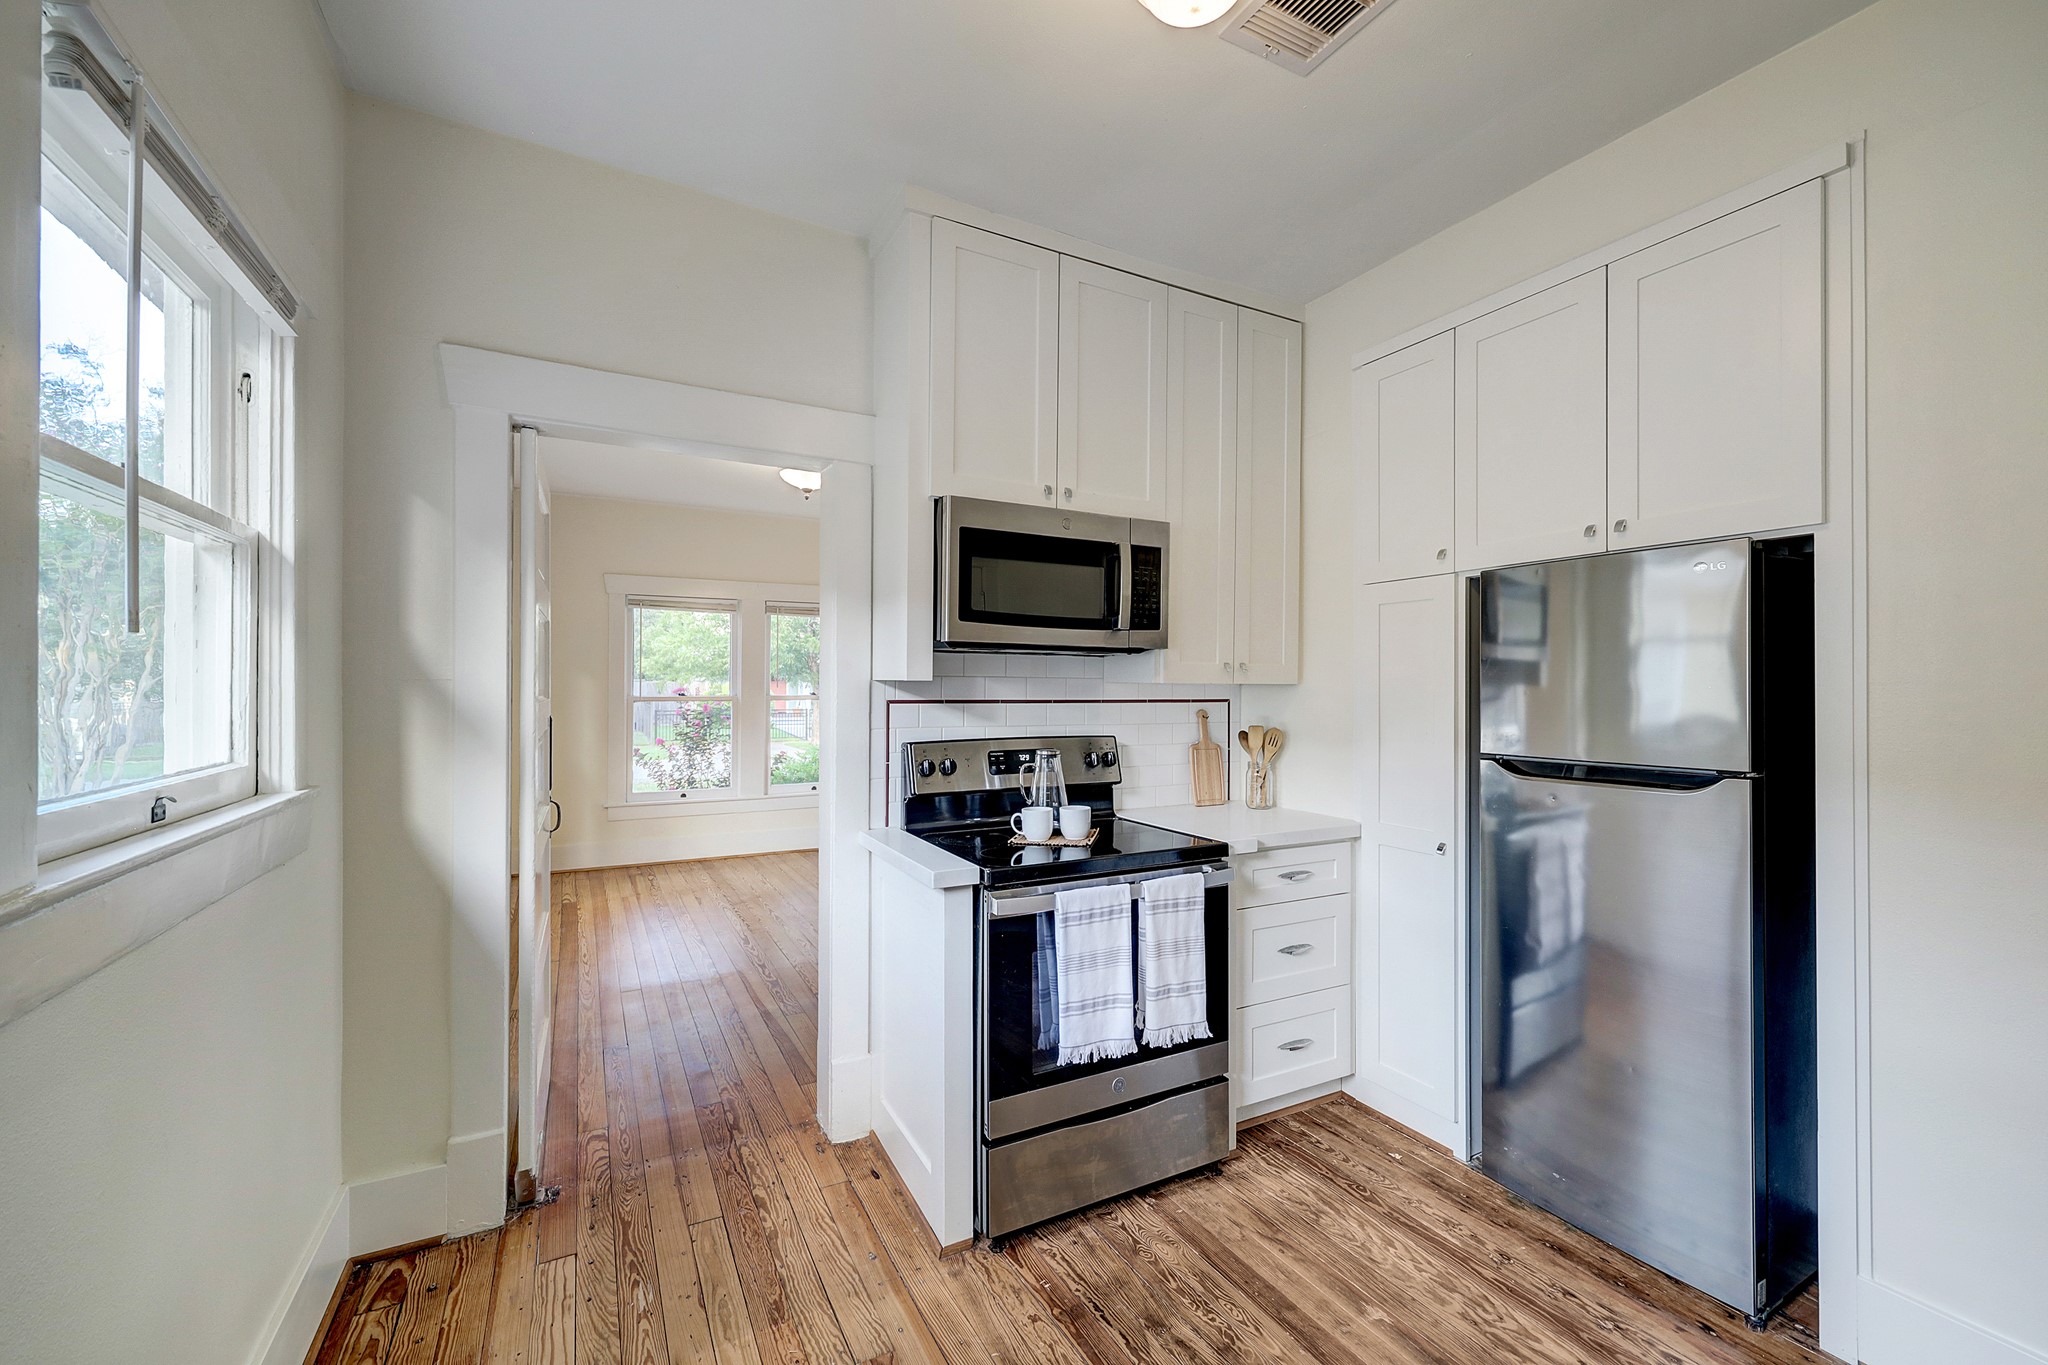 Original kitchen painstakingly restored with modern upgrades, floor to ceiling built in cabinets with shaker style custom pine facing, white granite countertops, stainless steel appliances, note period pencil tile on backsplash.